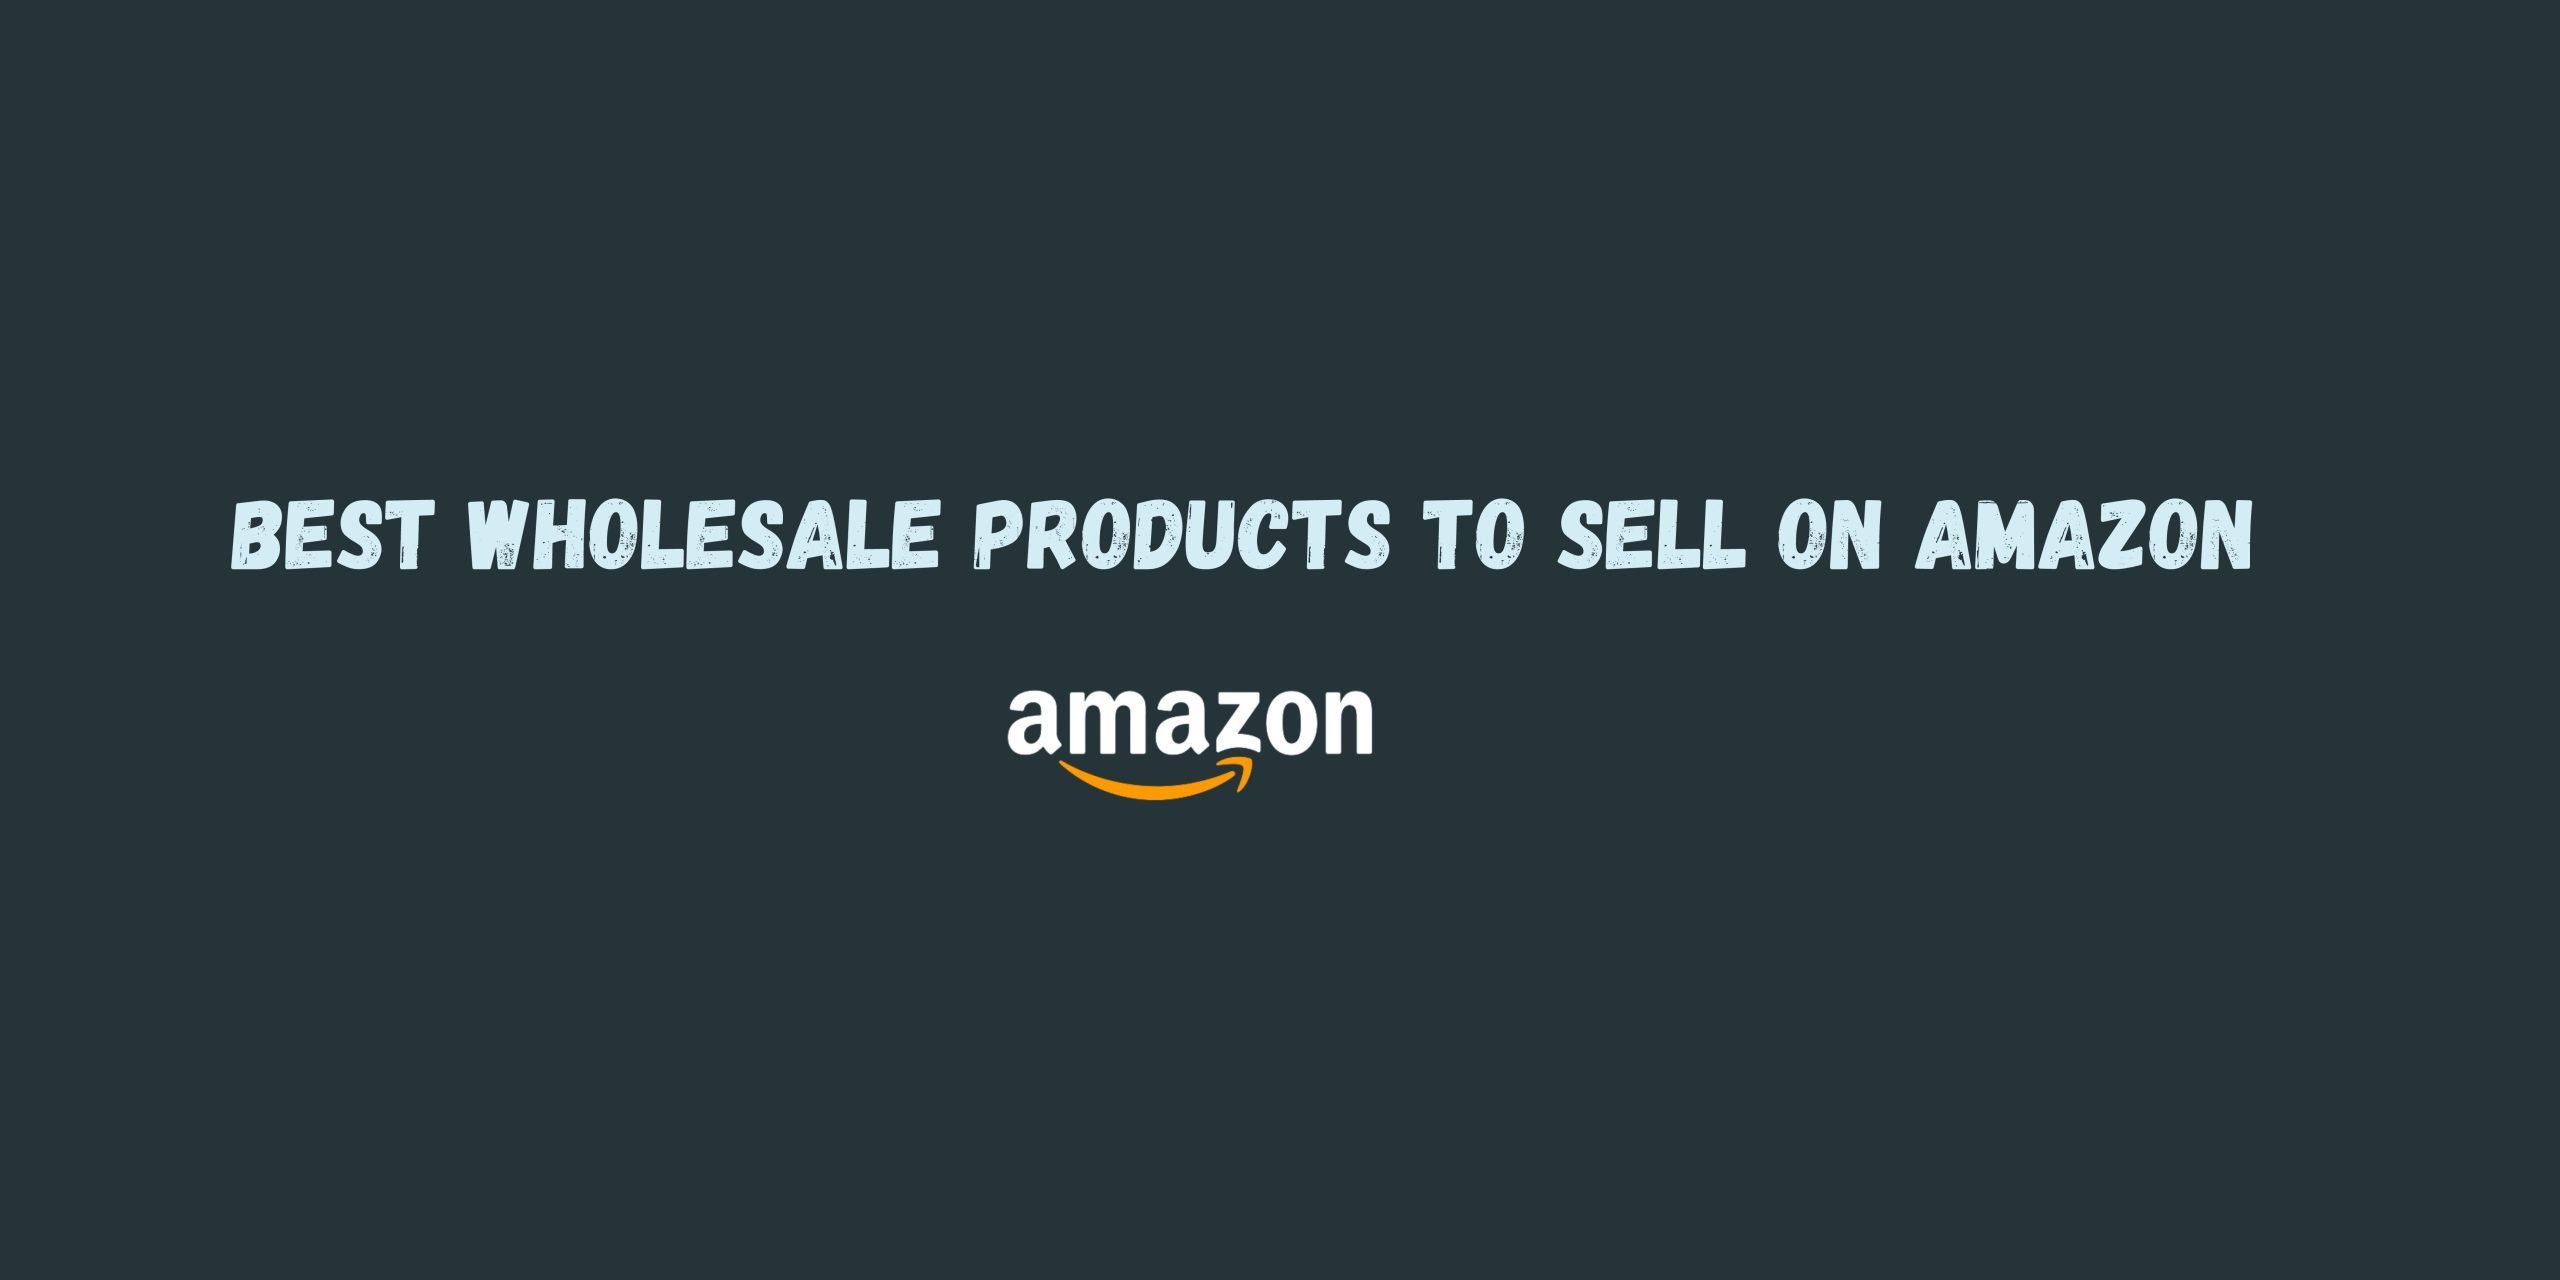 10 Best Wholesale Products to Sell on Amazon